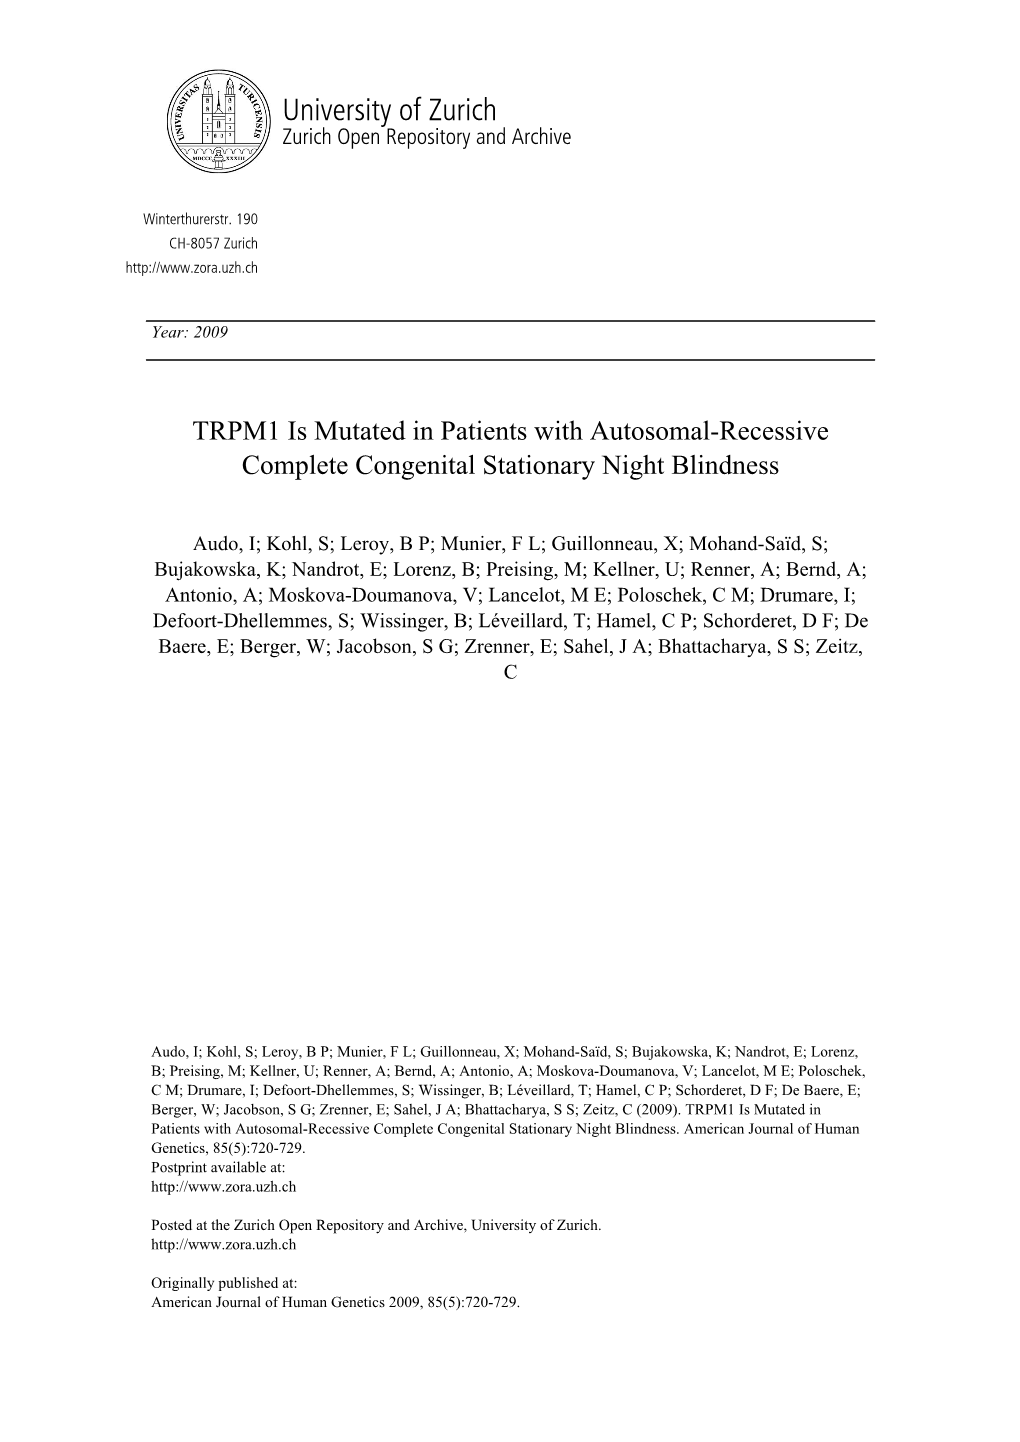 A Novel Gene, TRPM1 Is Mutated in Patients with Complete Autosomal